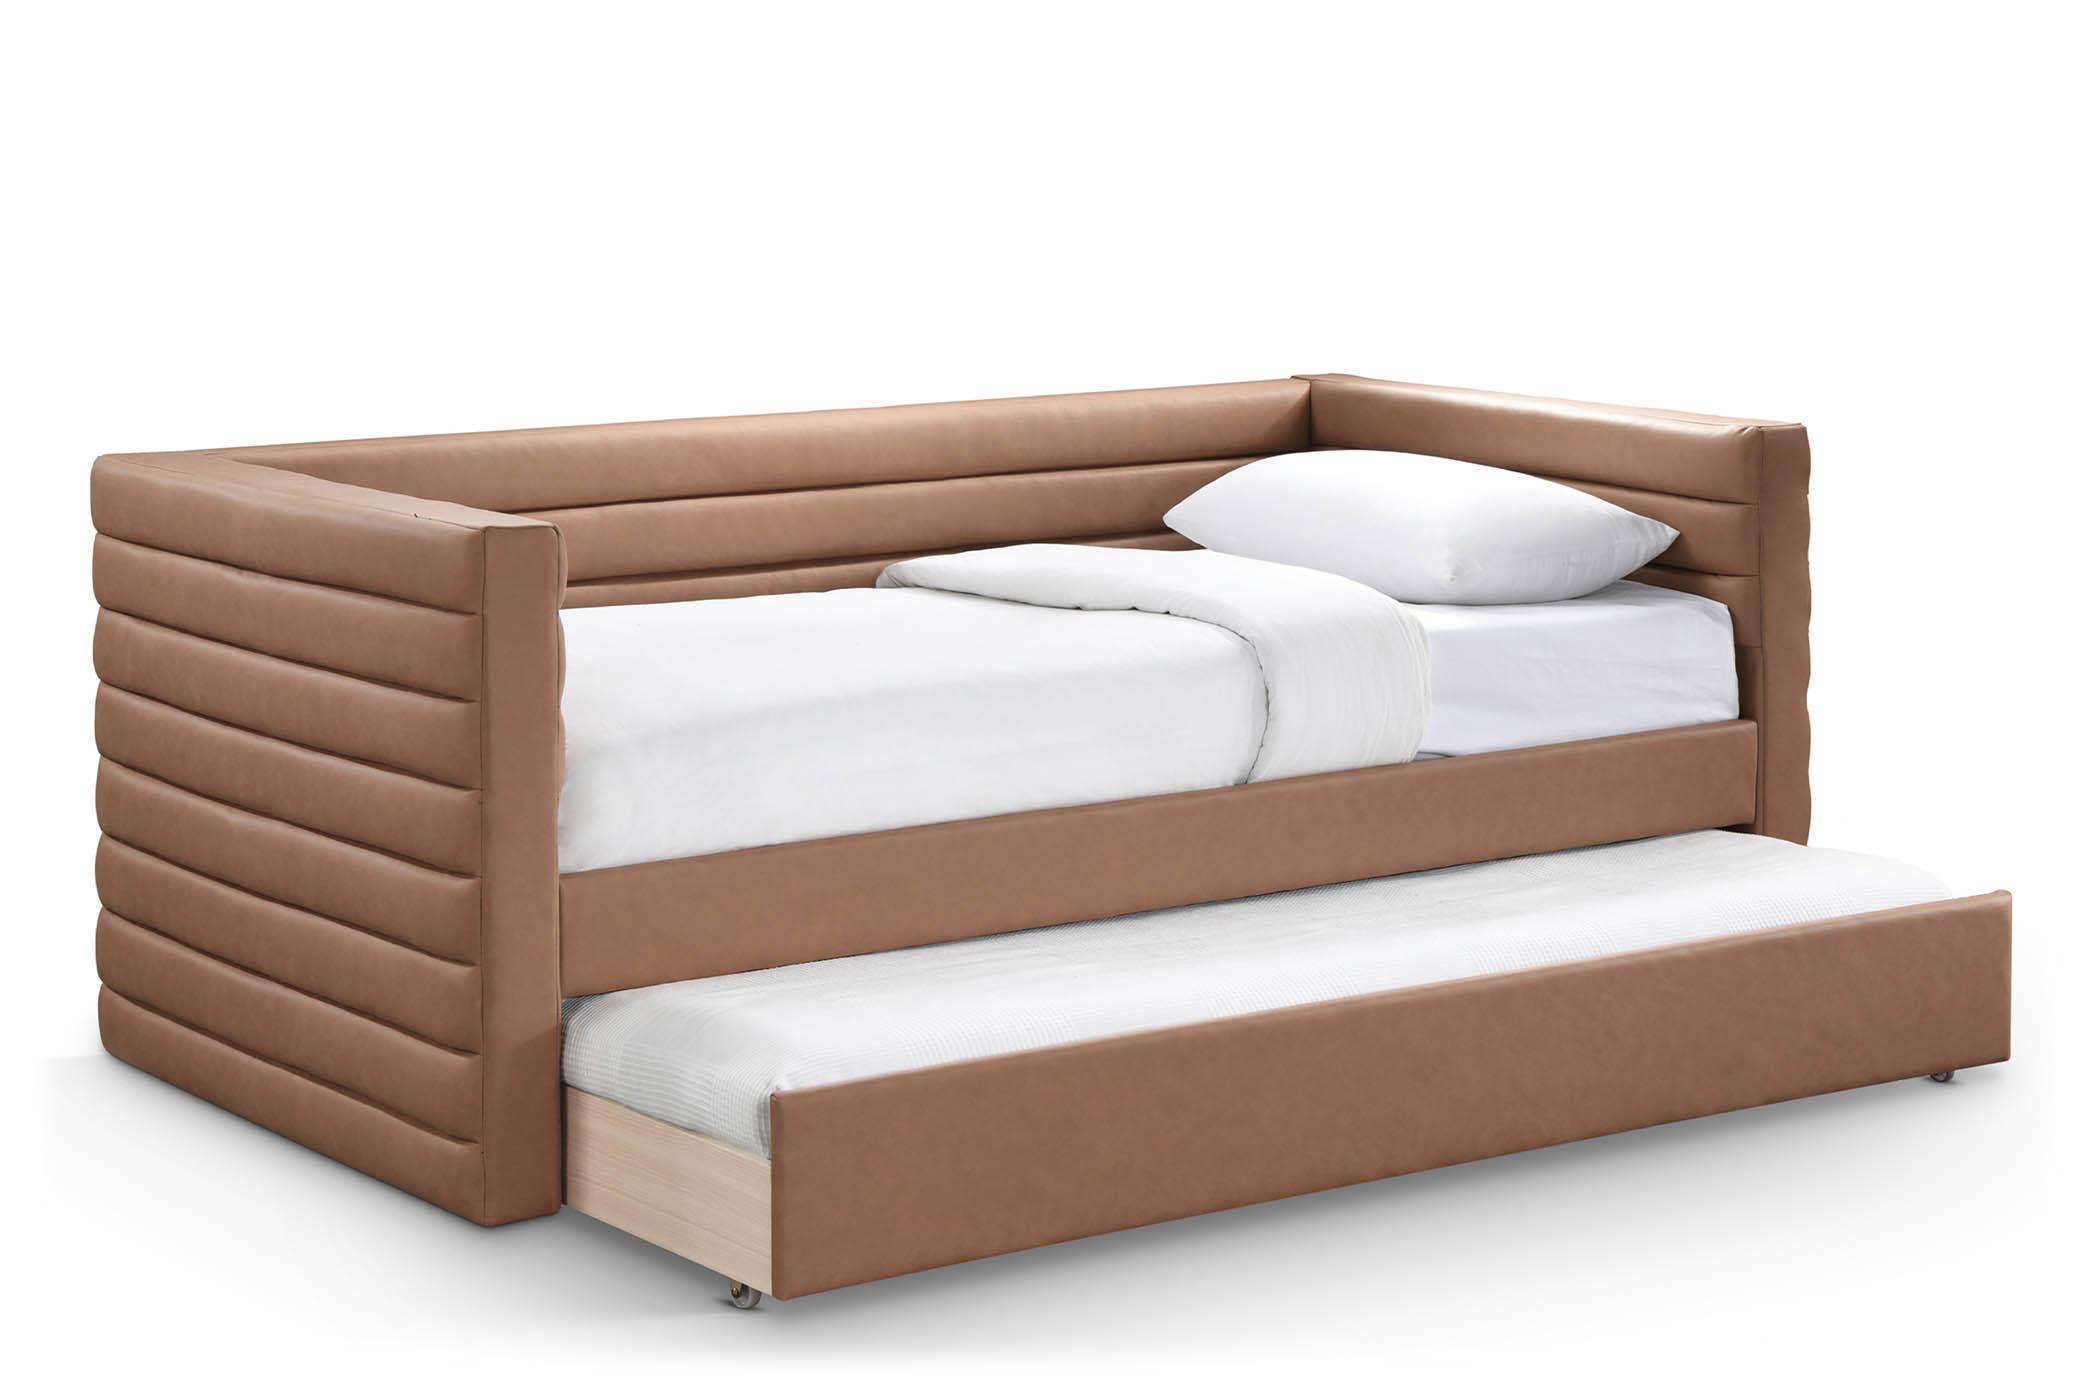 Meridian Furniture BeverlyCognac-T Daybed